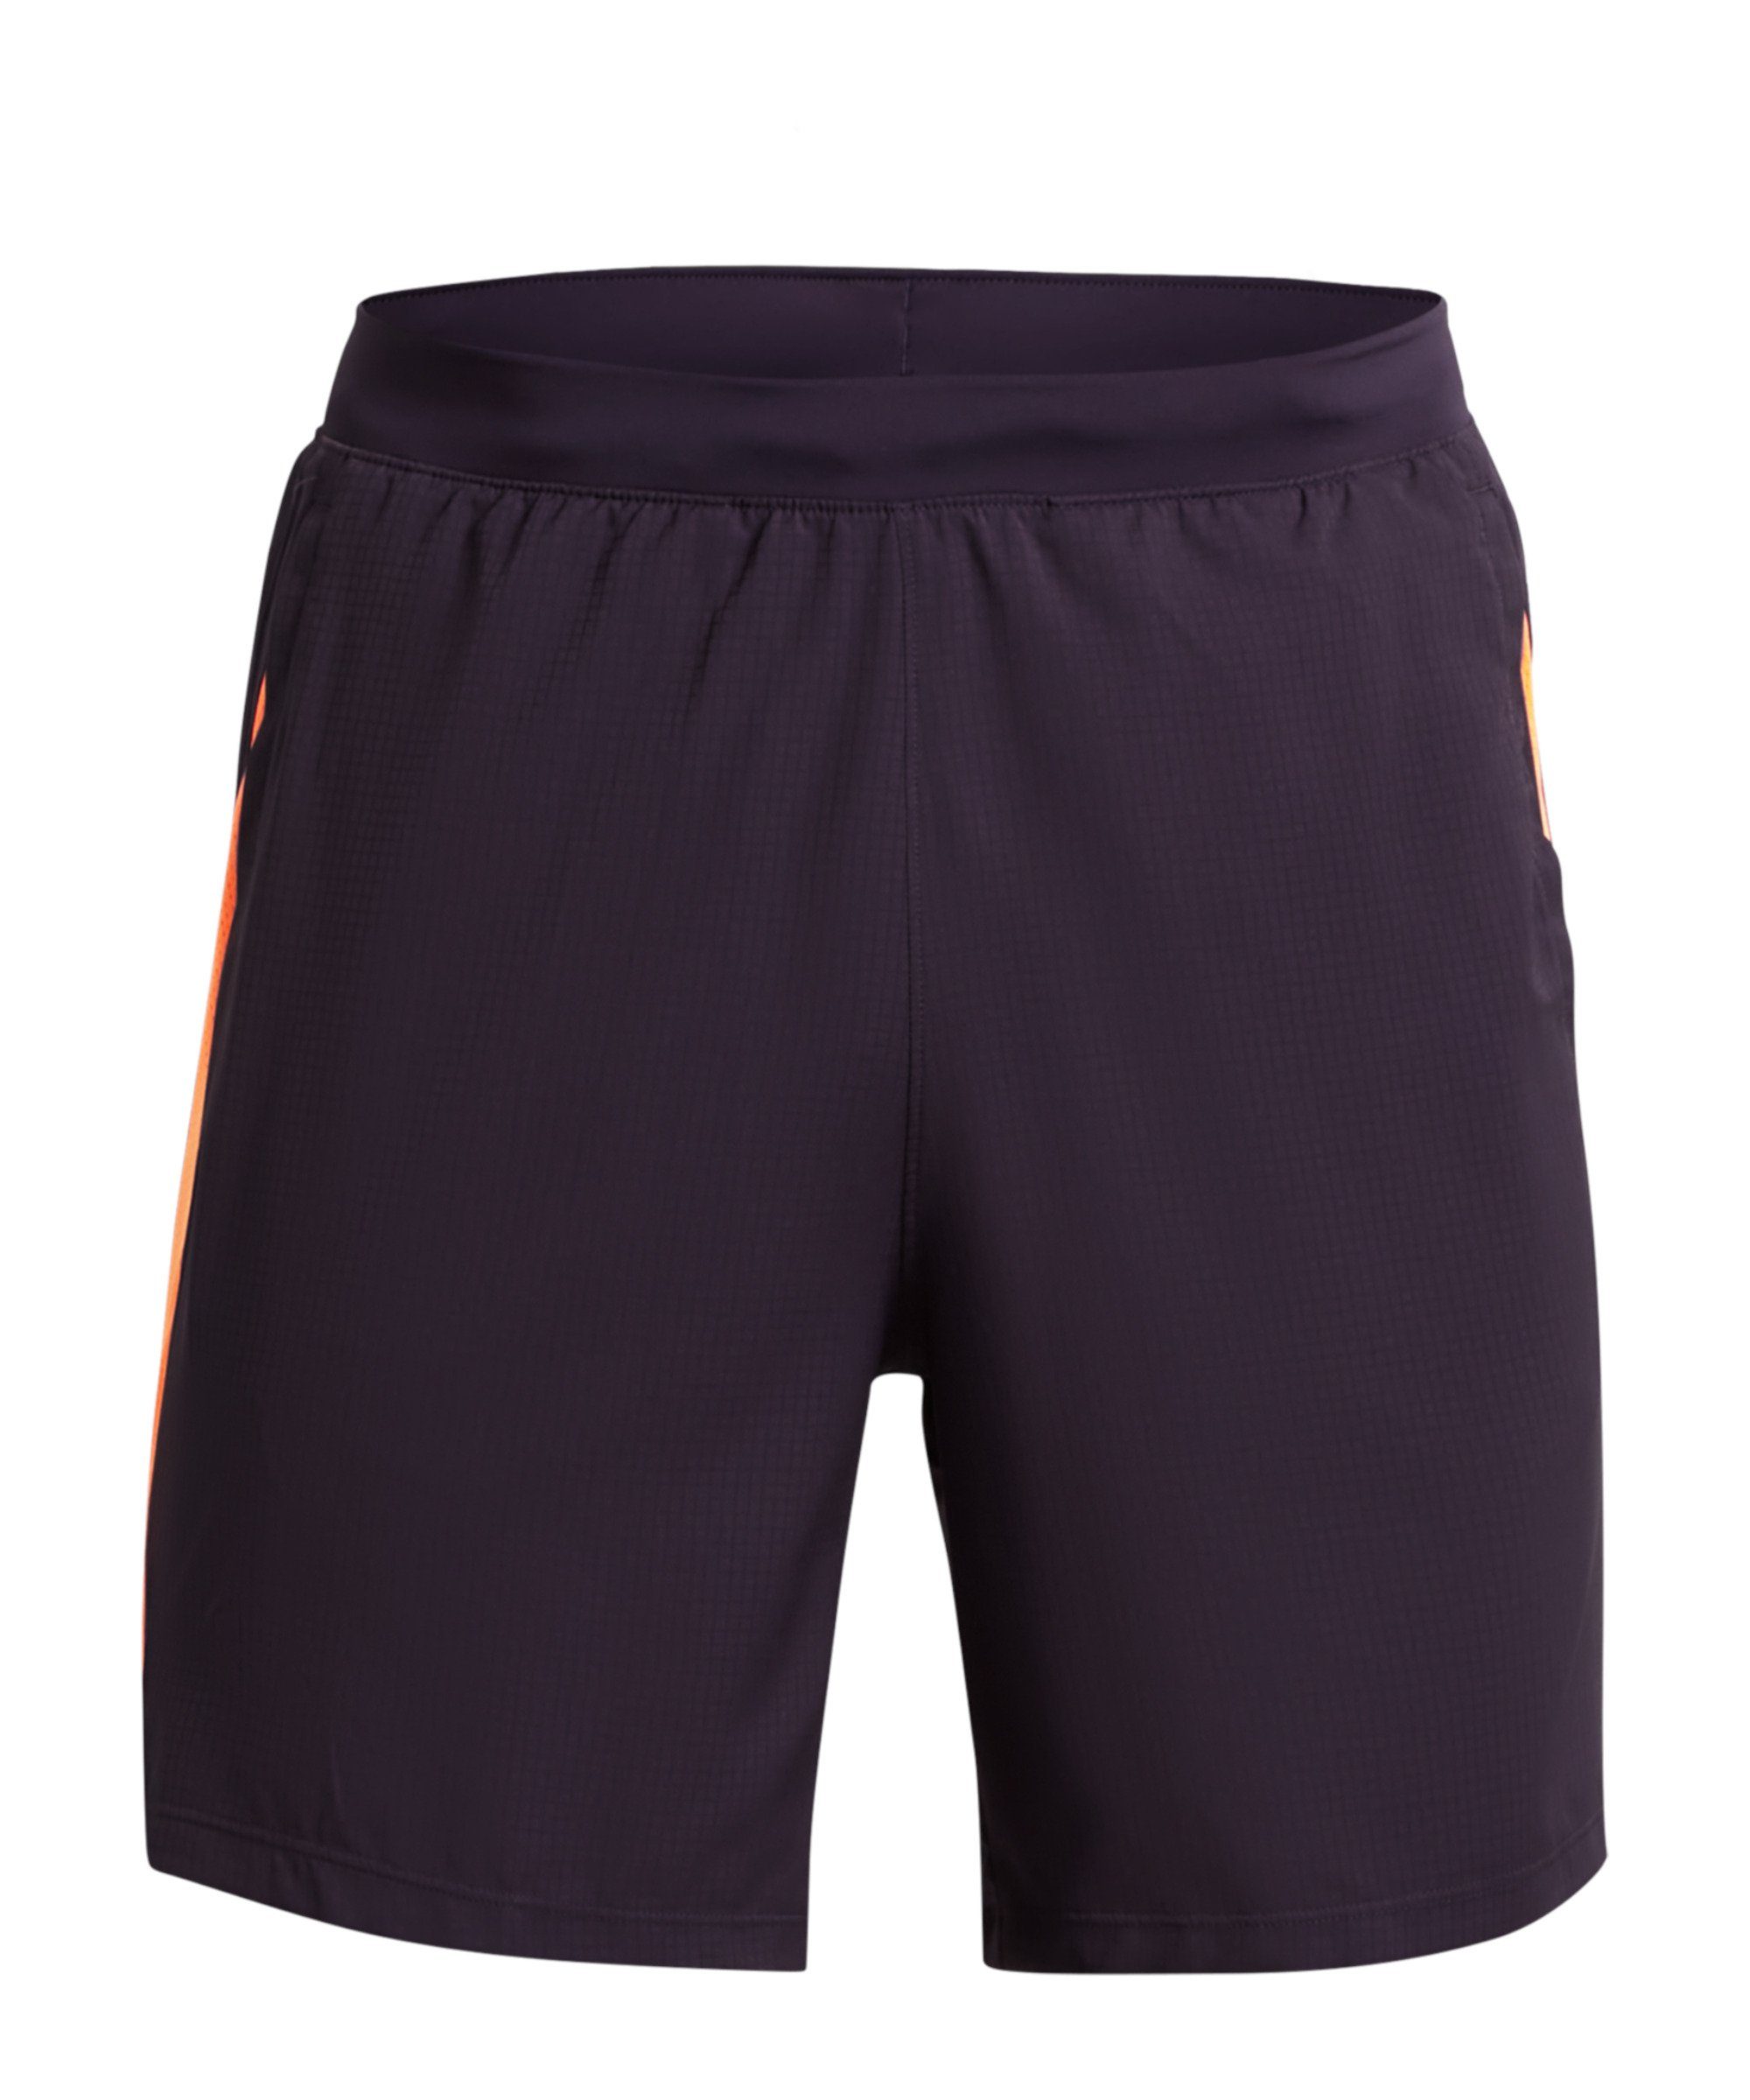 Under Armour® Laufshorts 7inch Graphic Short lila